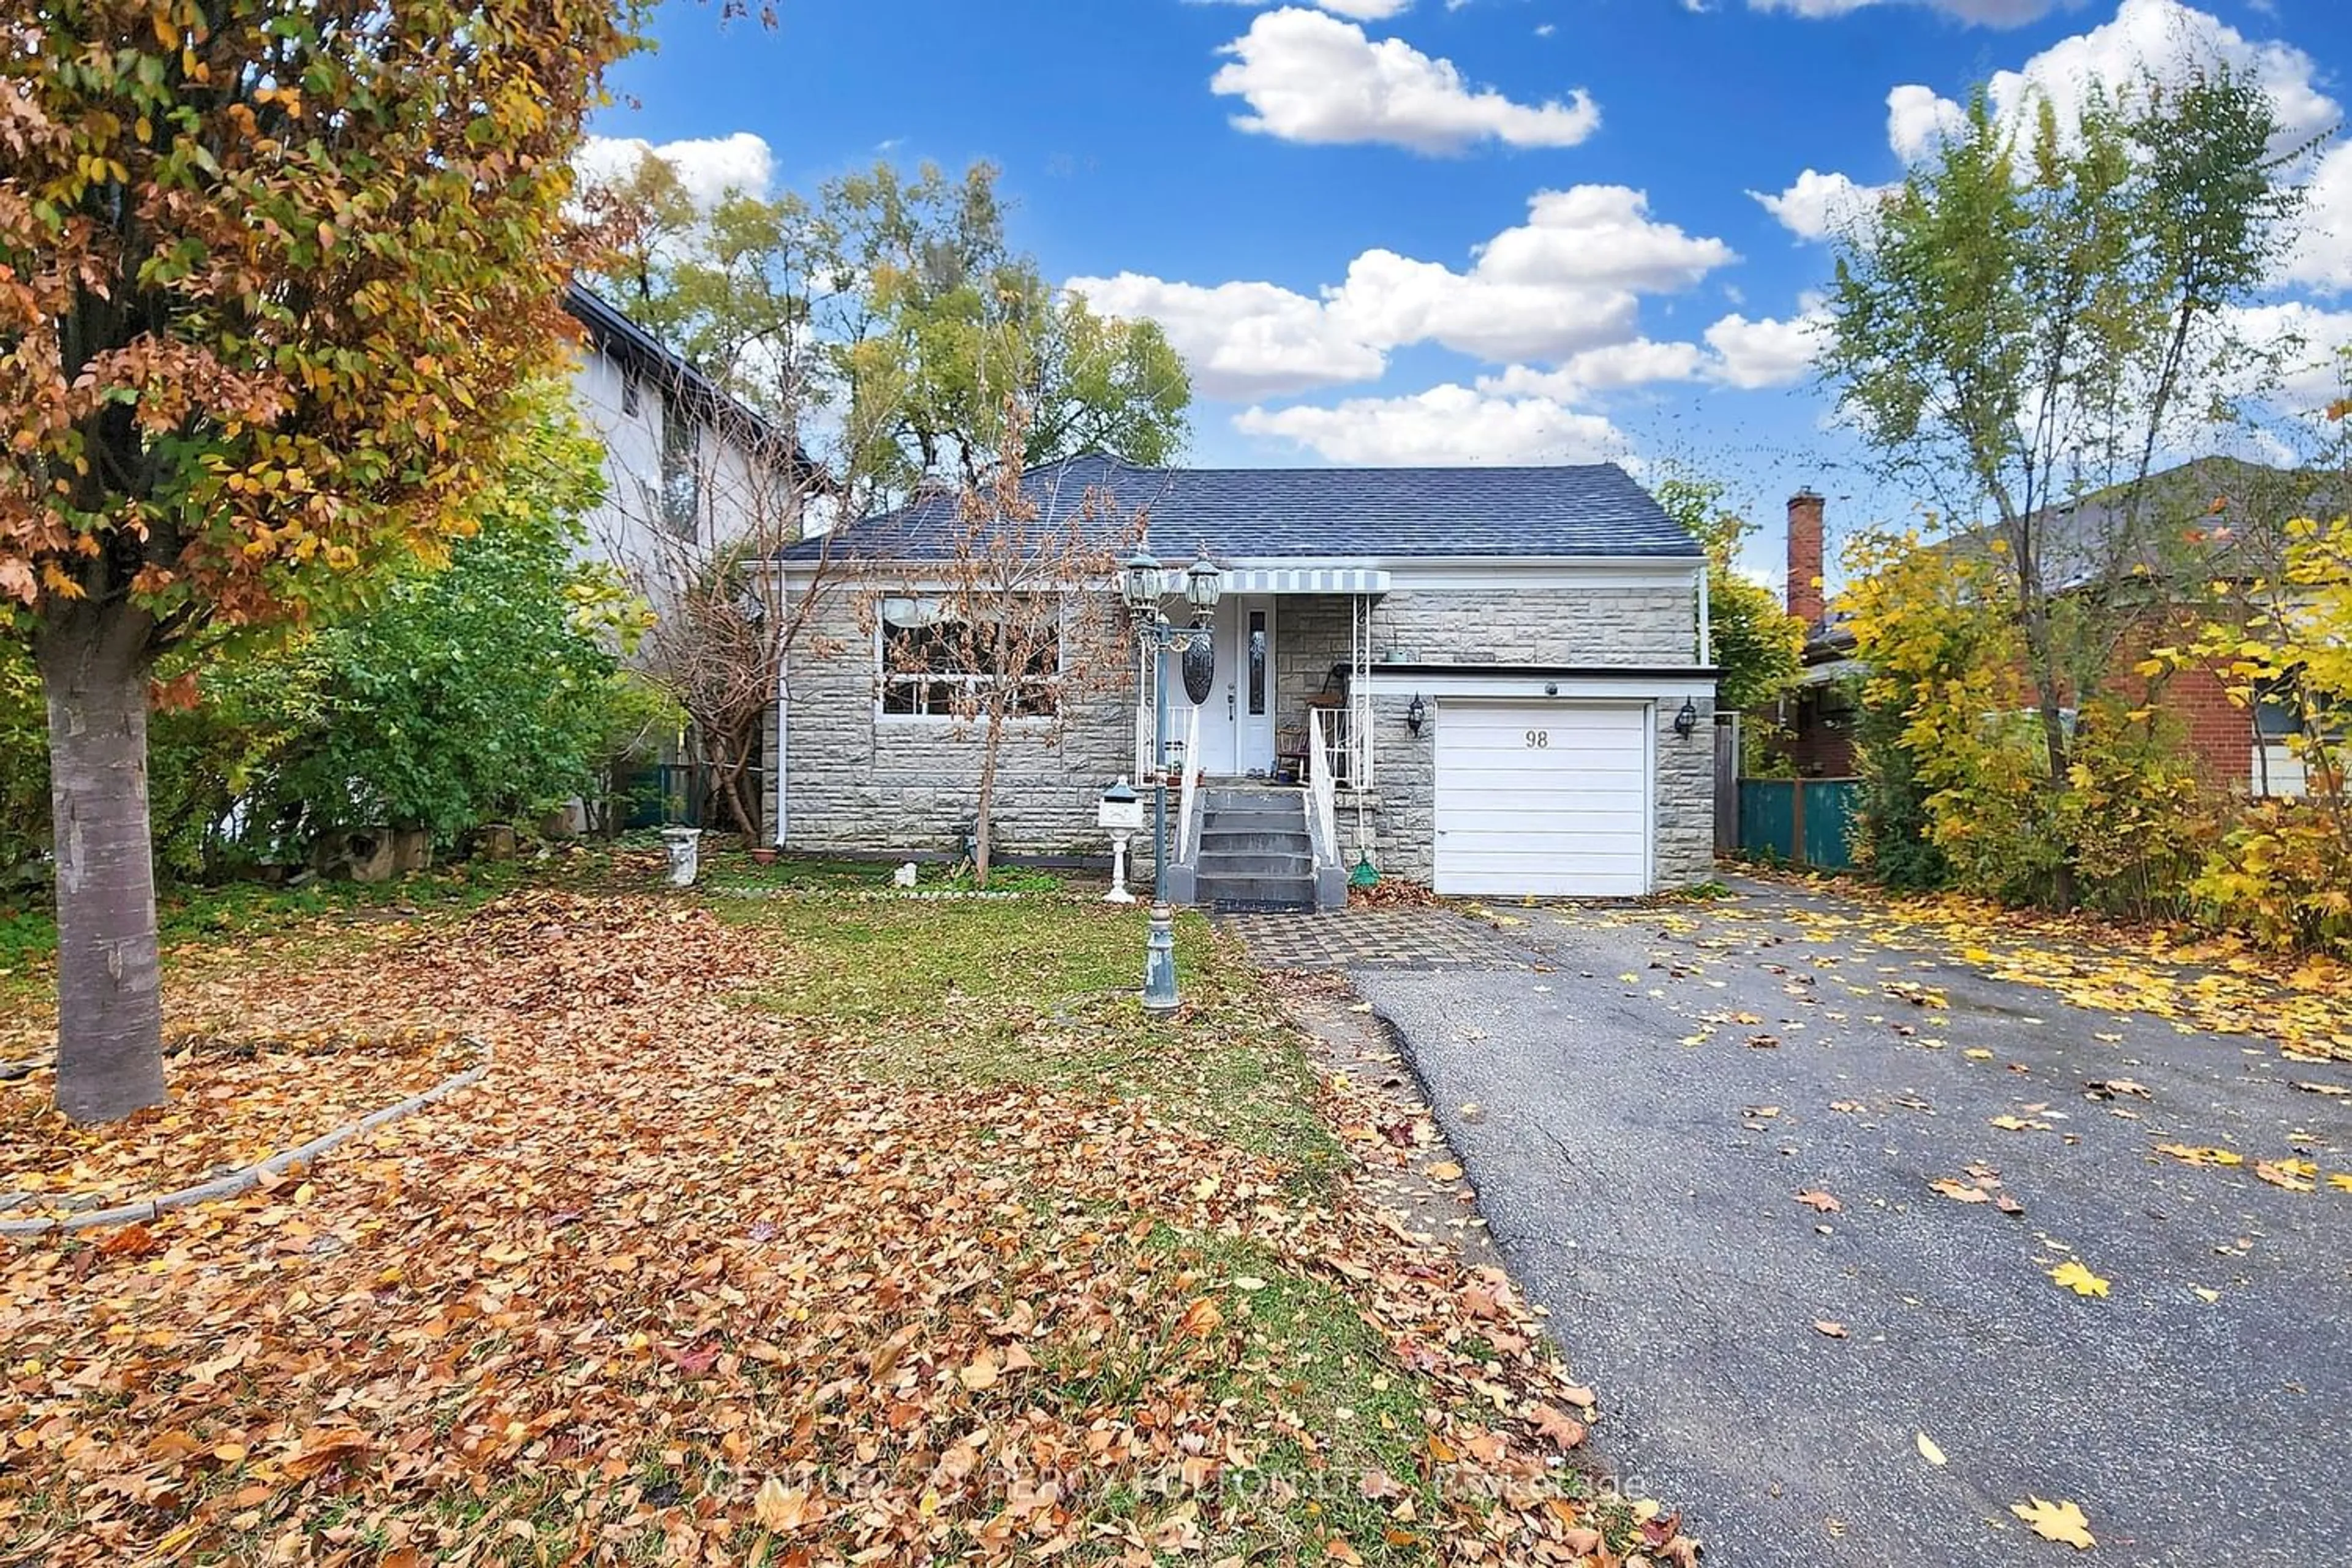 Street view for 98 Charleswood Dr, Toronto Ontario M3H 1X6